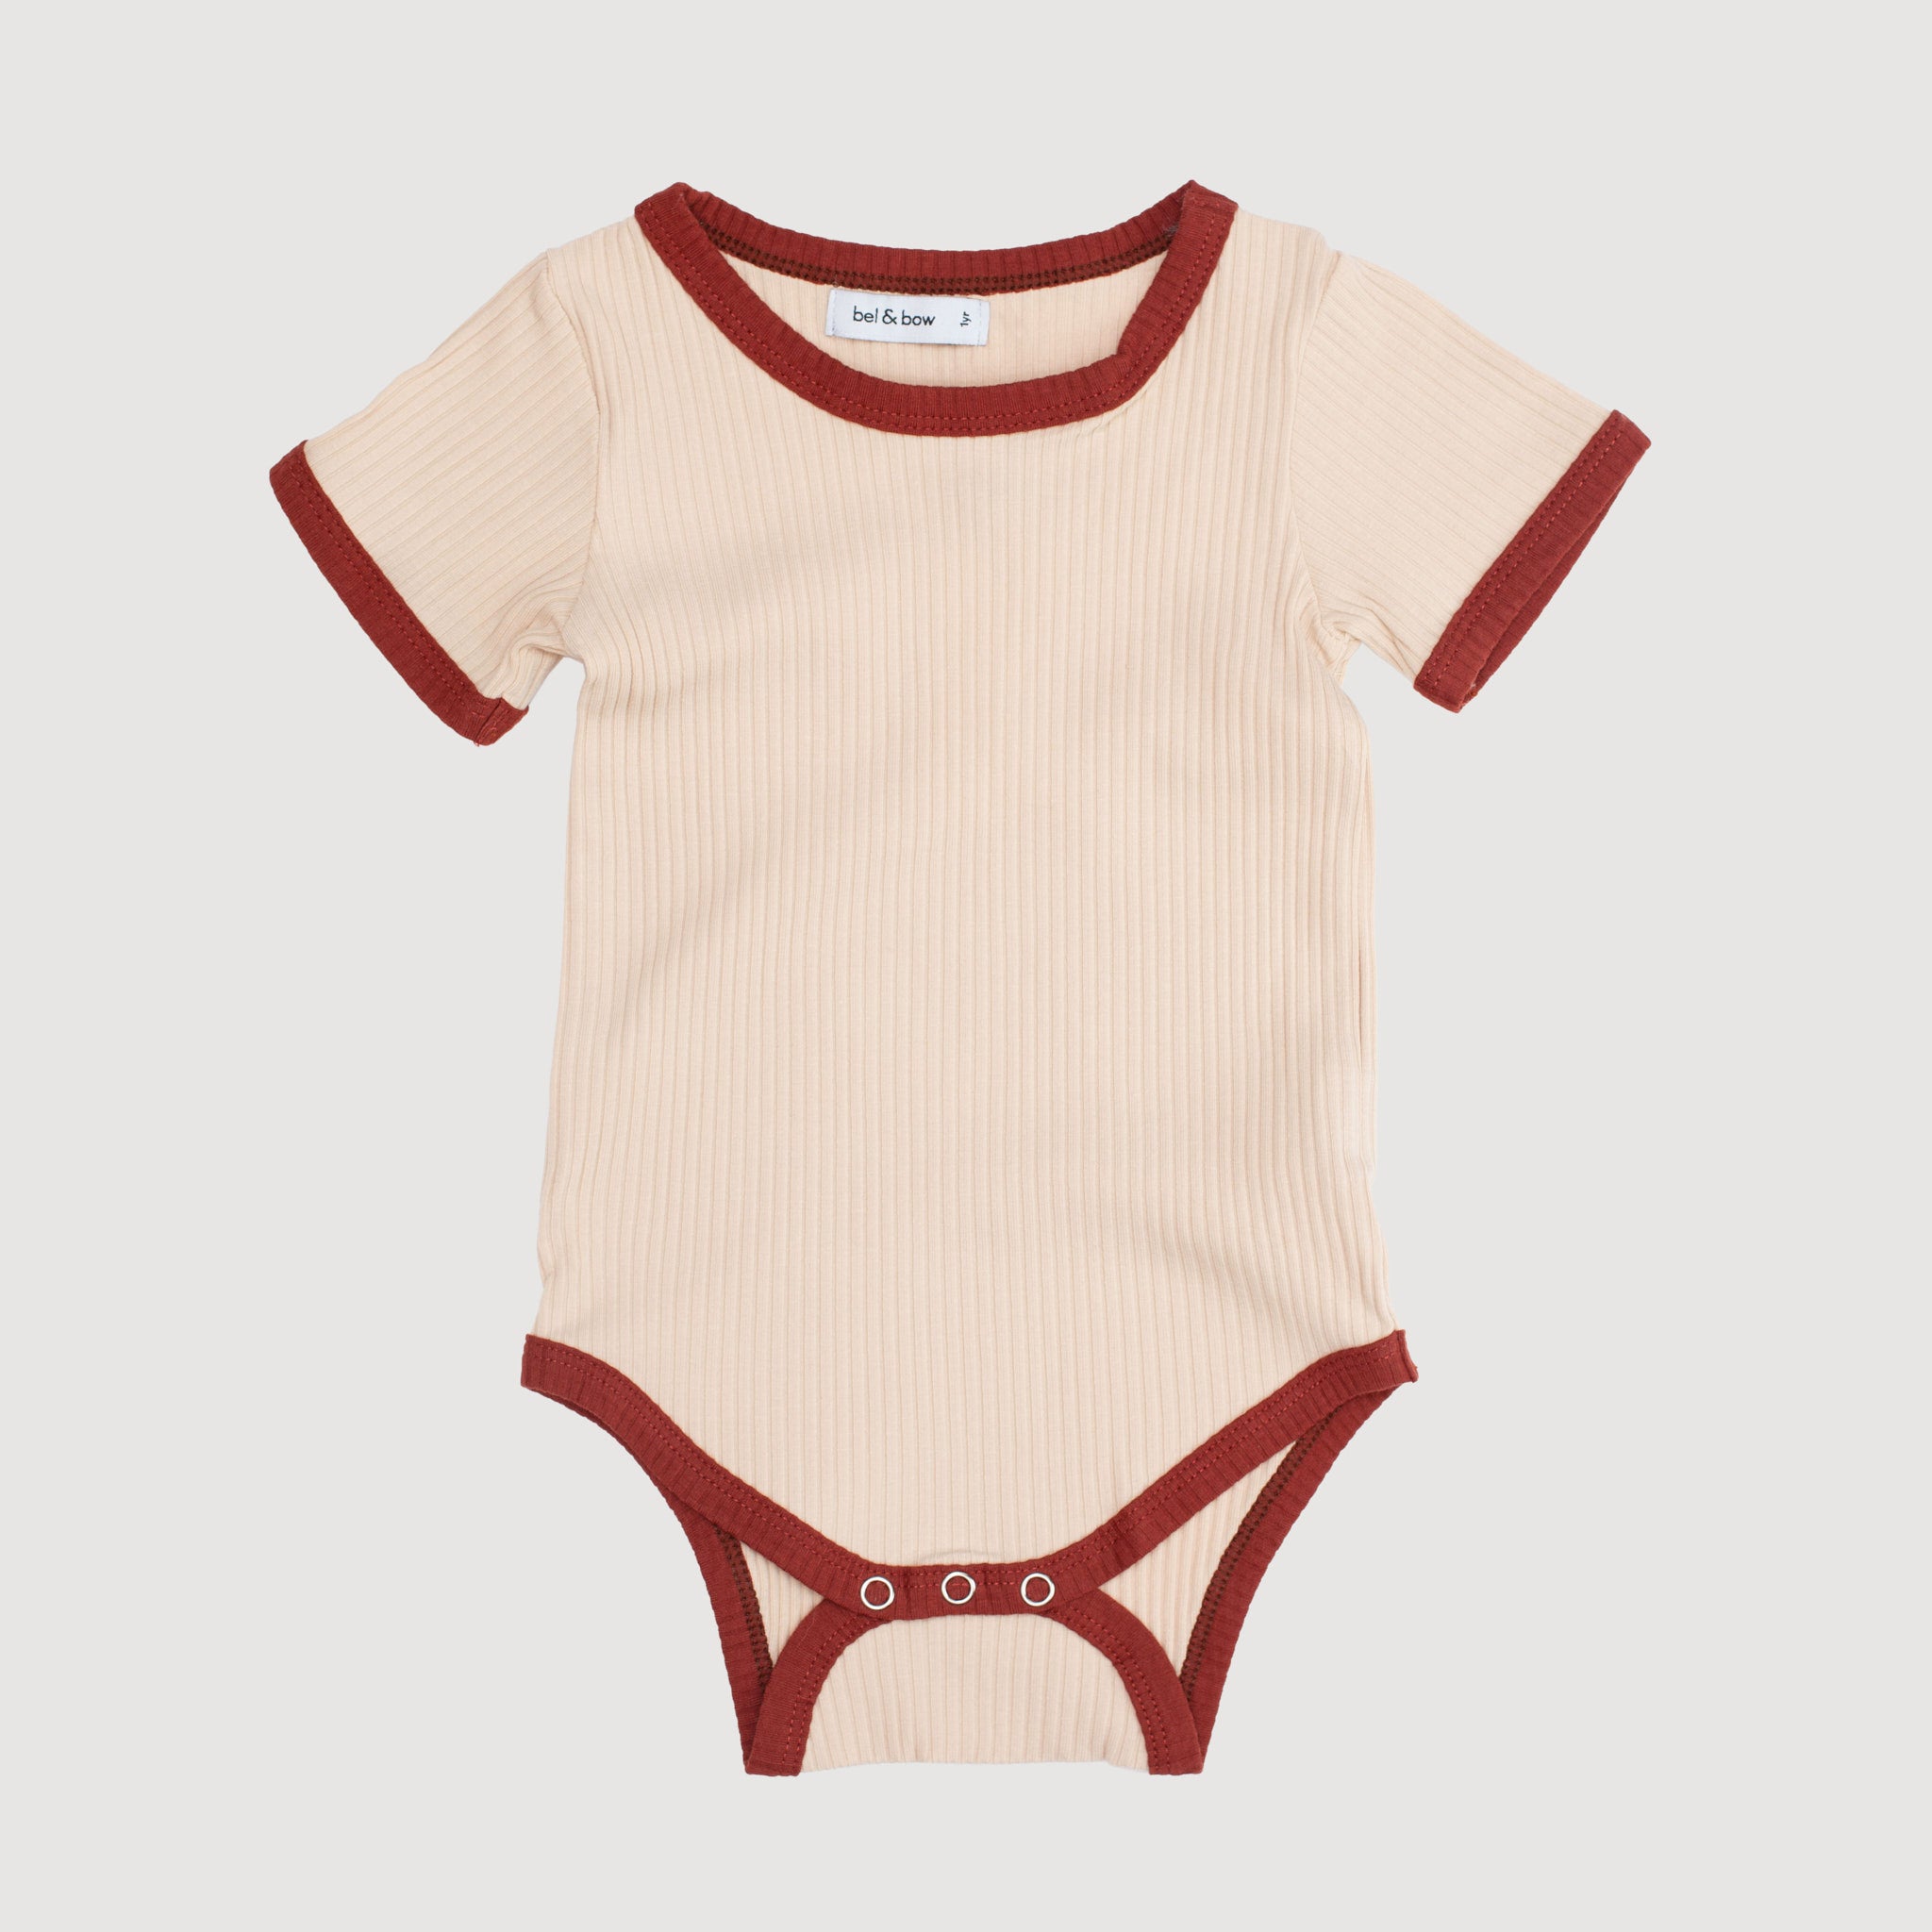 Retro Ringer Ribbed Bodysuit - Oatmeal with Rust Binds bel & bow